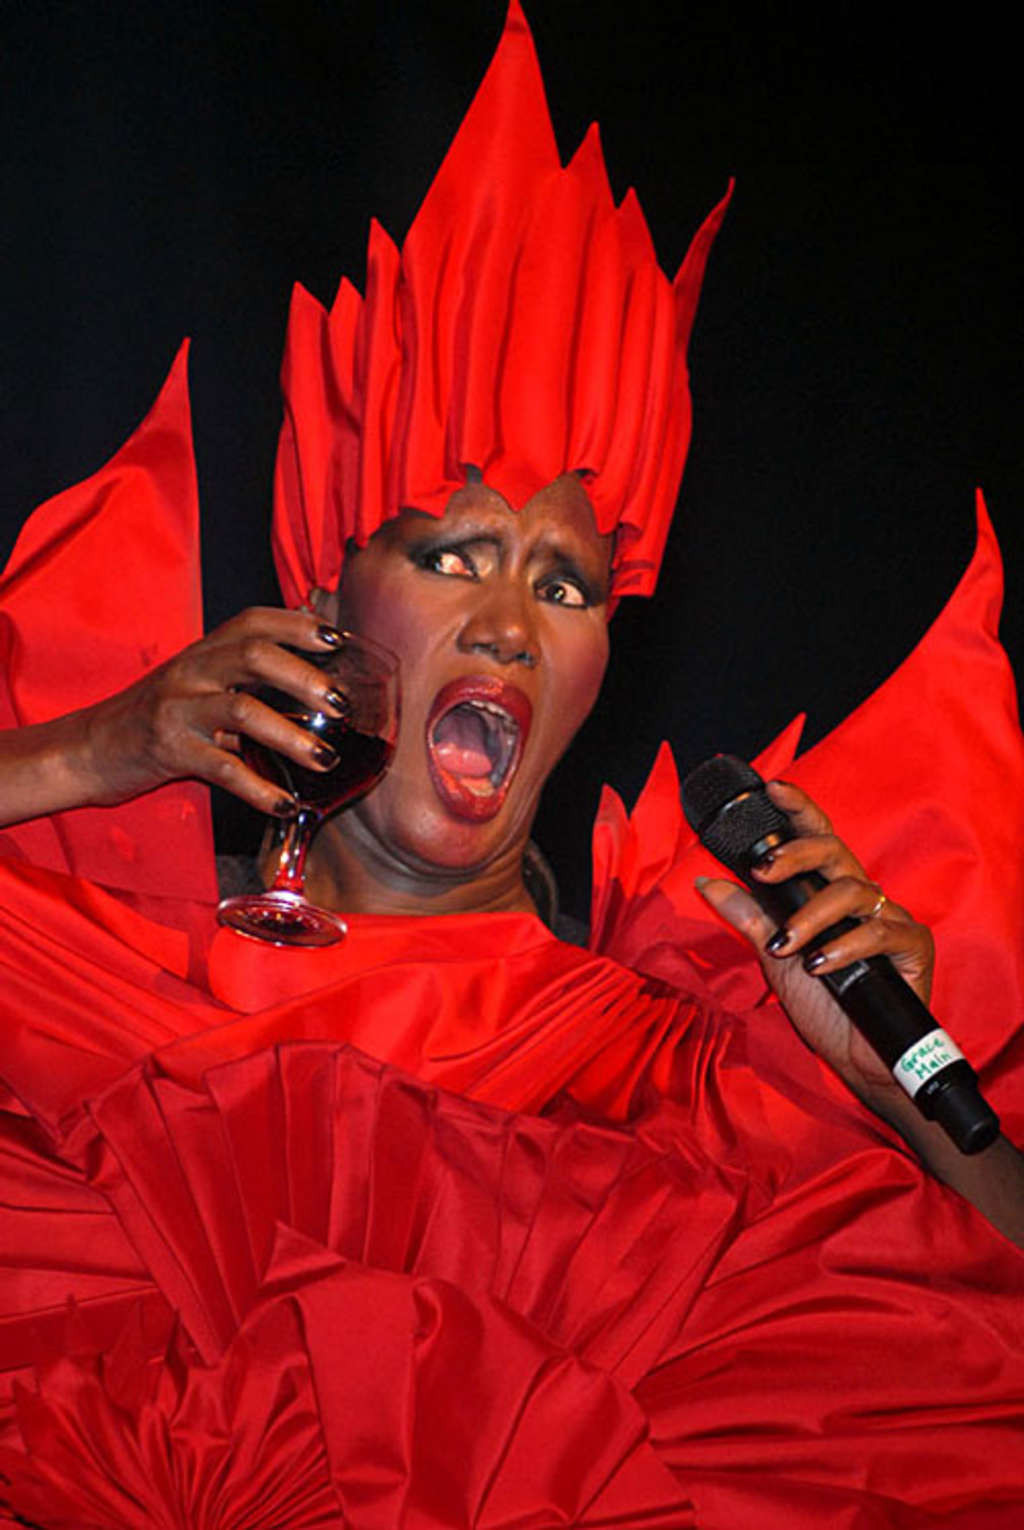 Grace Jones showing her nice ass upskirt on stage paparazzi pictures #75385476